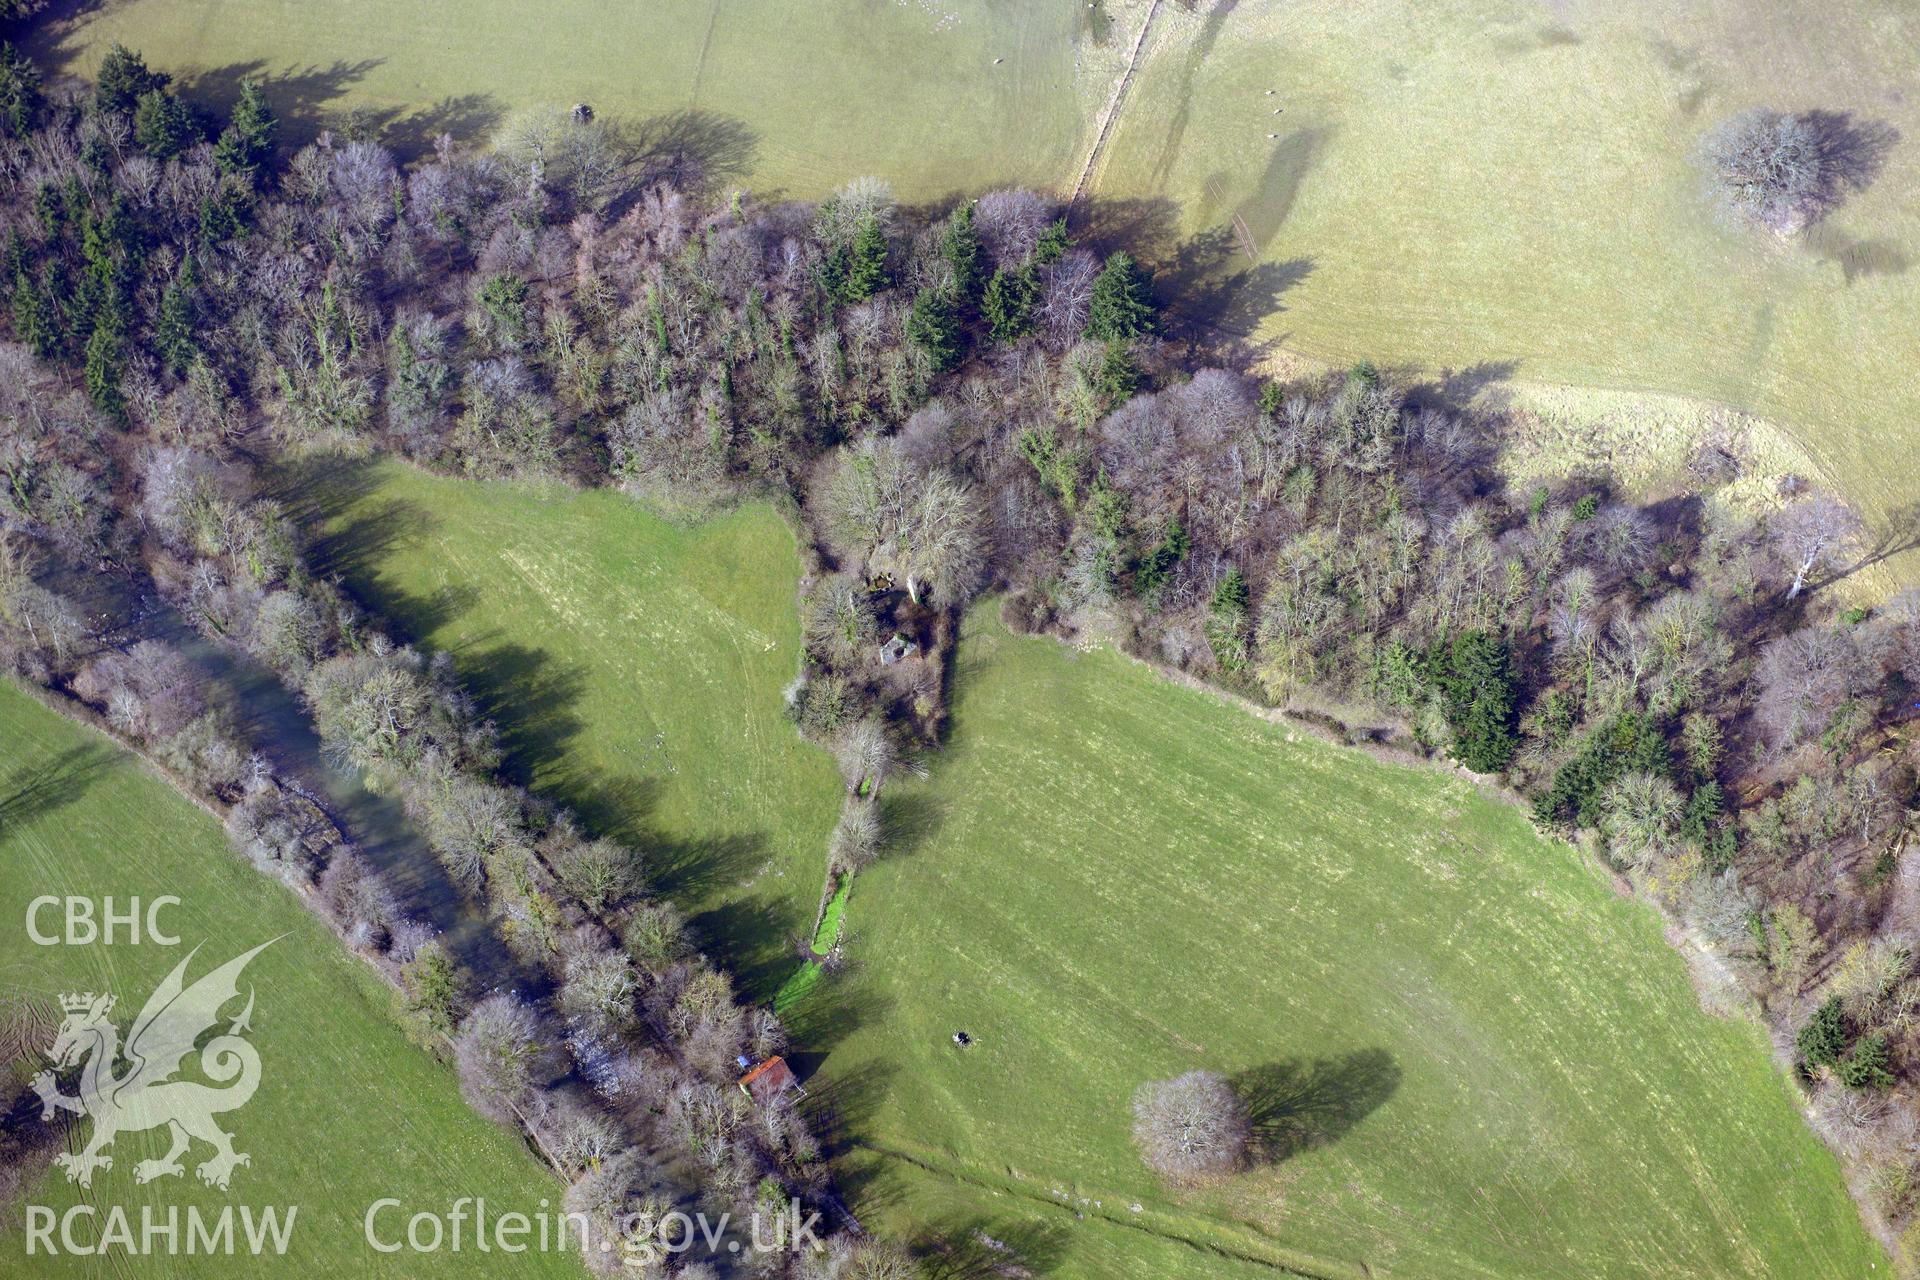 Ffynnon Fair and Ffynnon Fair well chapel, on the banks of the River Elwy, south west of St. Asaph. Oblique aerial photograph taken during the Royal Commission?s programme of archaeological aerial reconnaissance by Toby Driver on 28th February 2013.